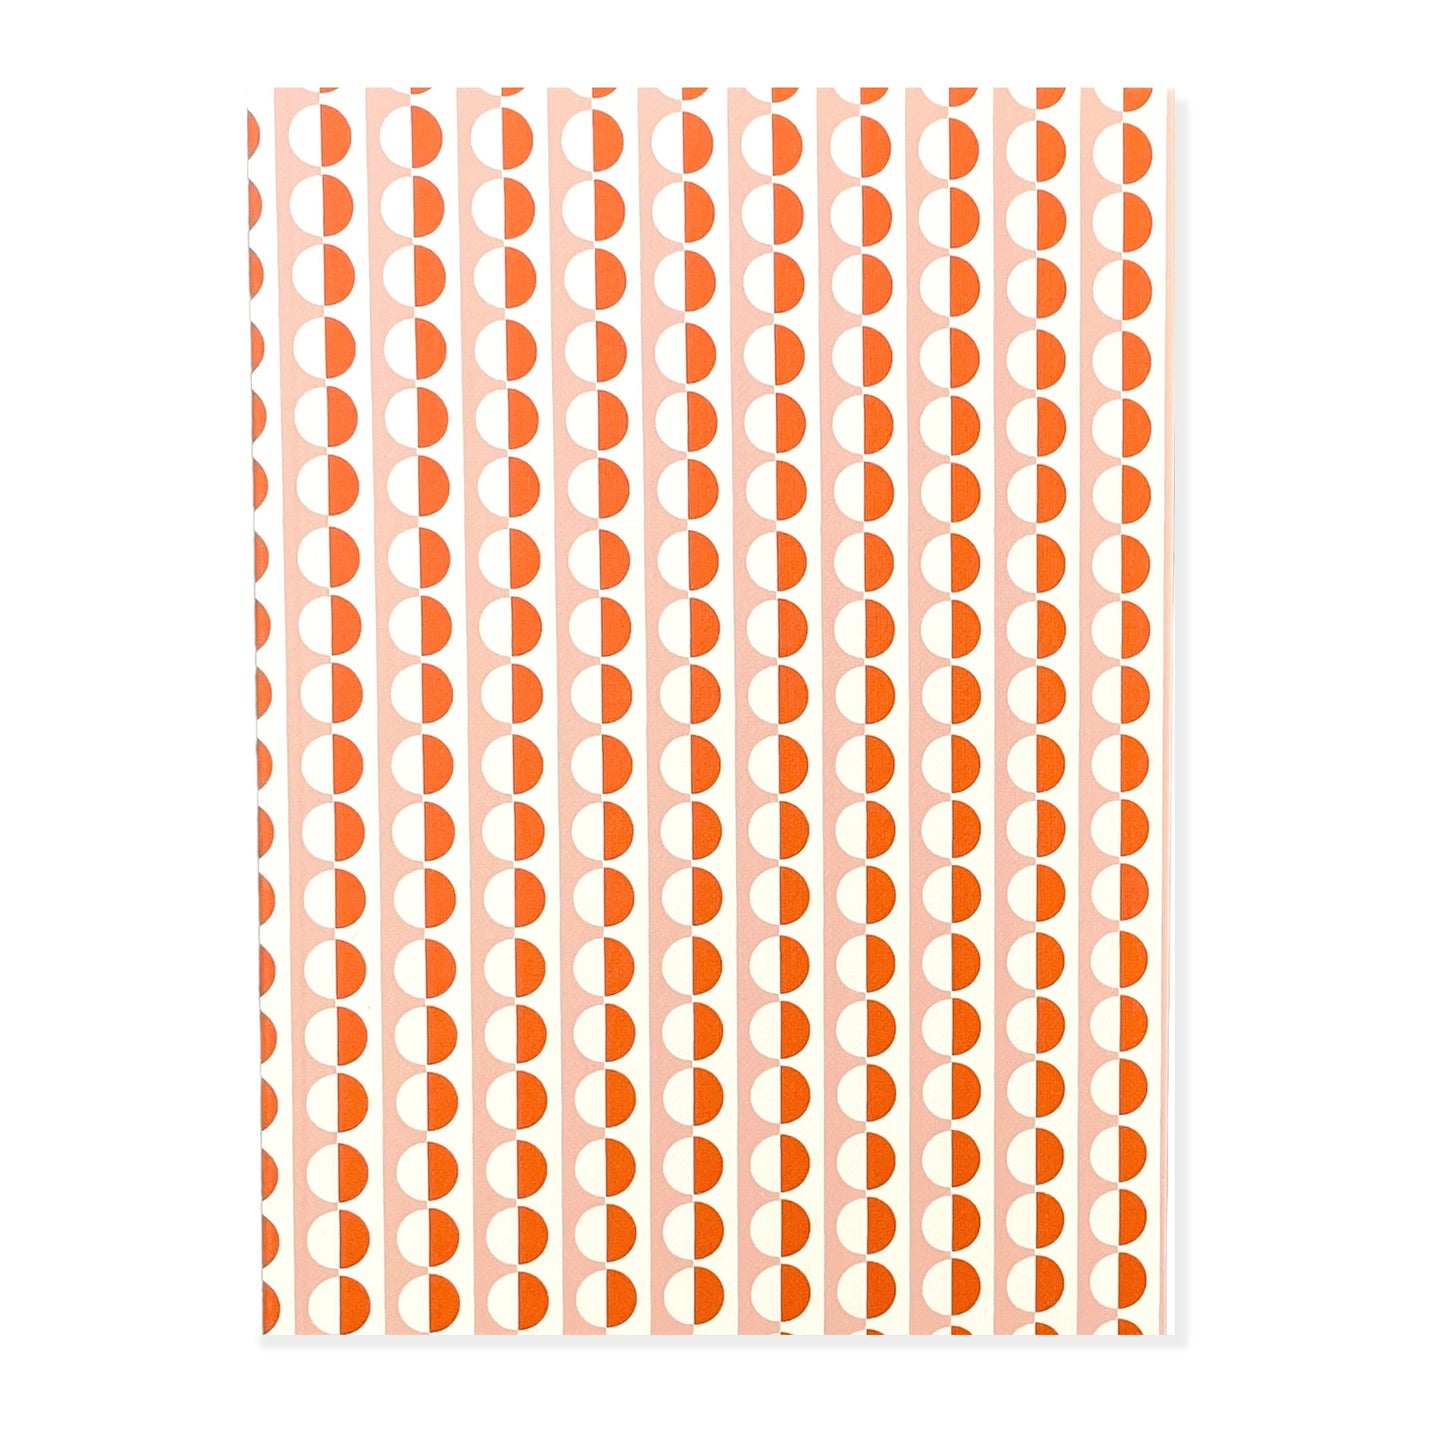 A5 softback notebook with geometric orange and pink repeat circle patterned cover. Plain inner pages